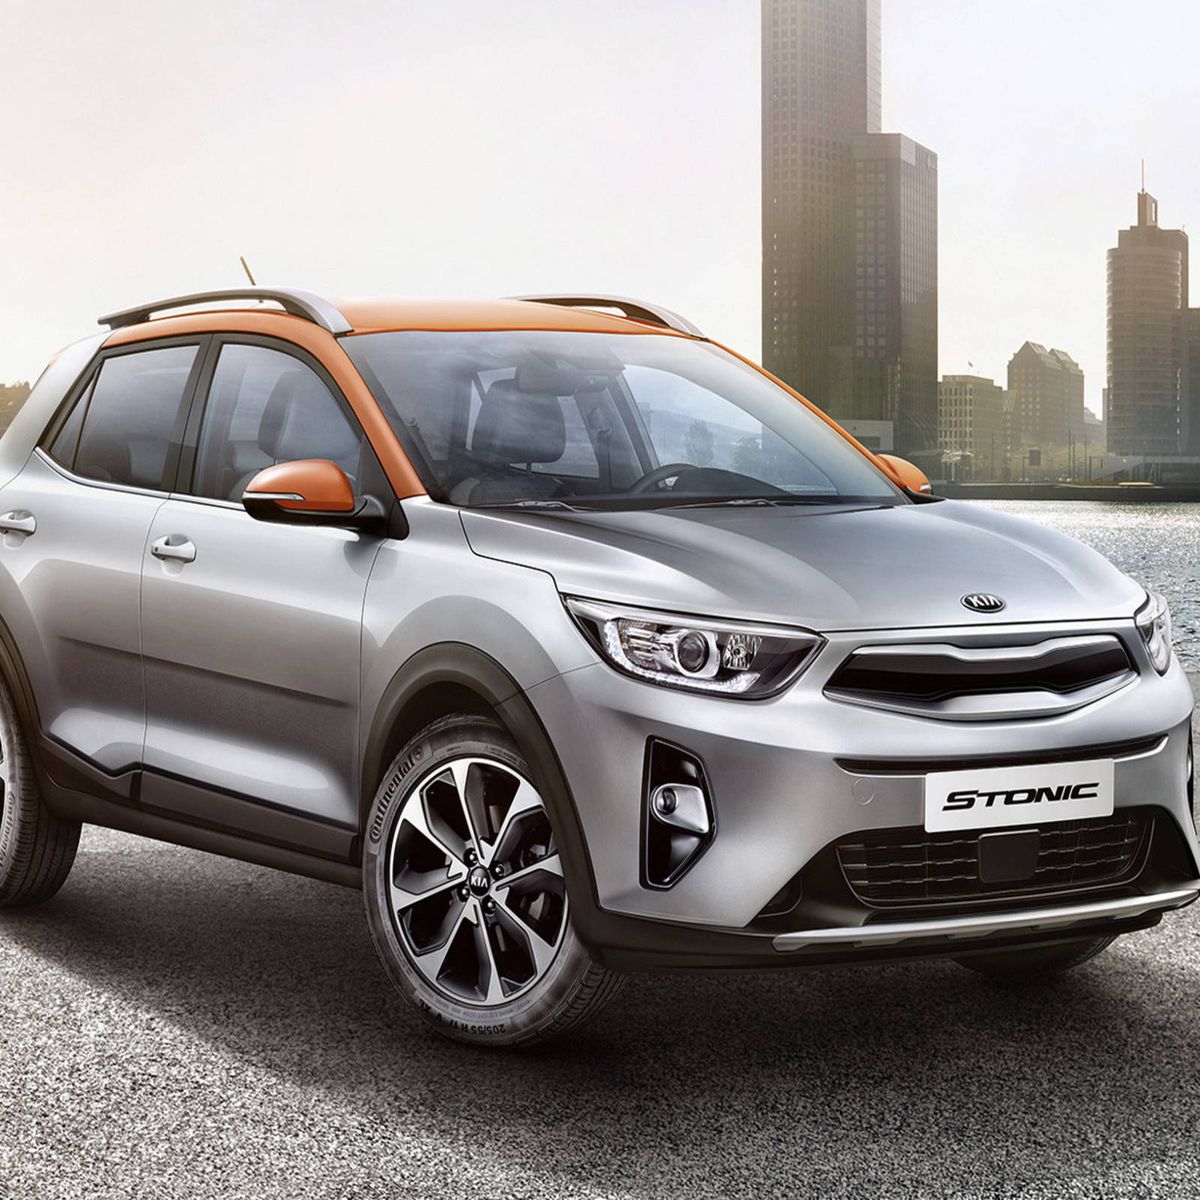 Kia Stonic is ready to battle subcompact crossovers, but is it coming here?